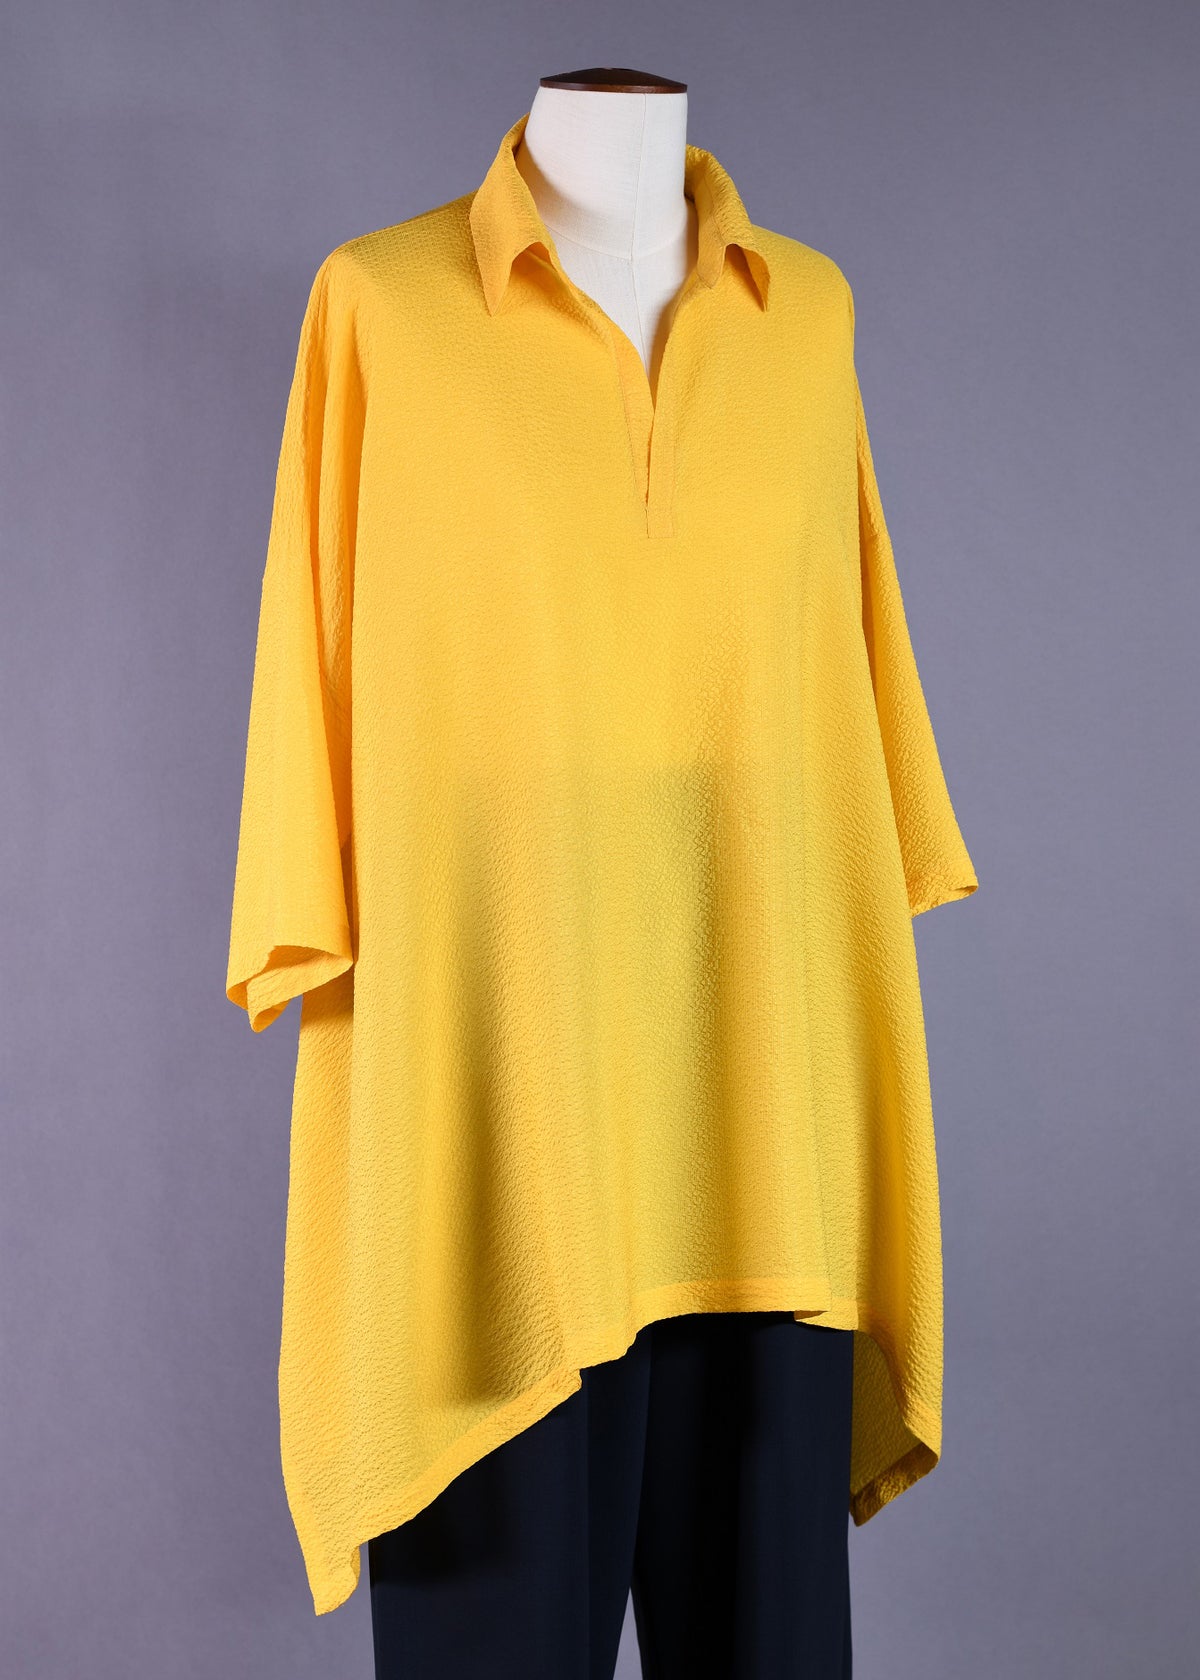 dps top with collar and front placket opening - long